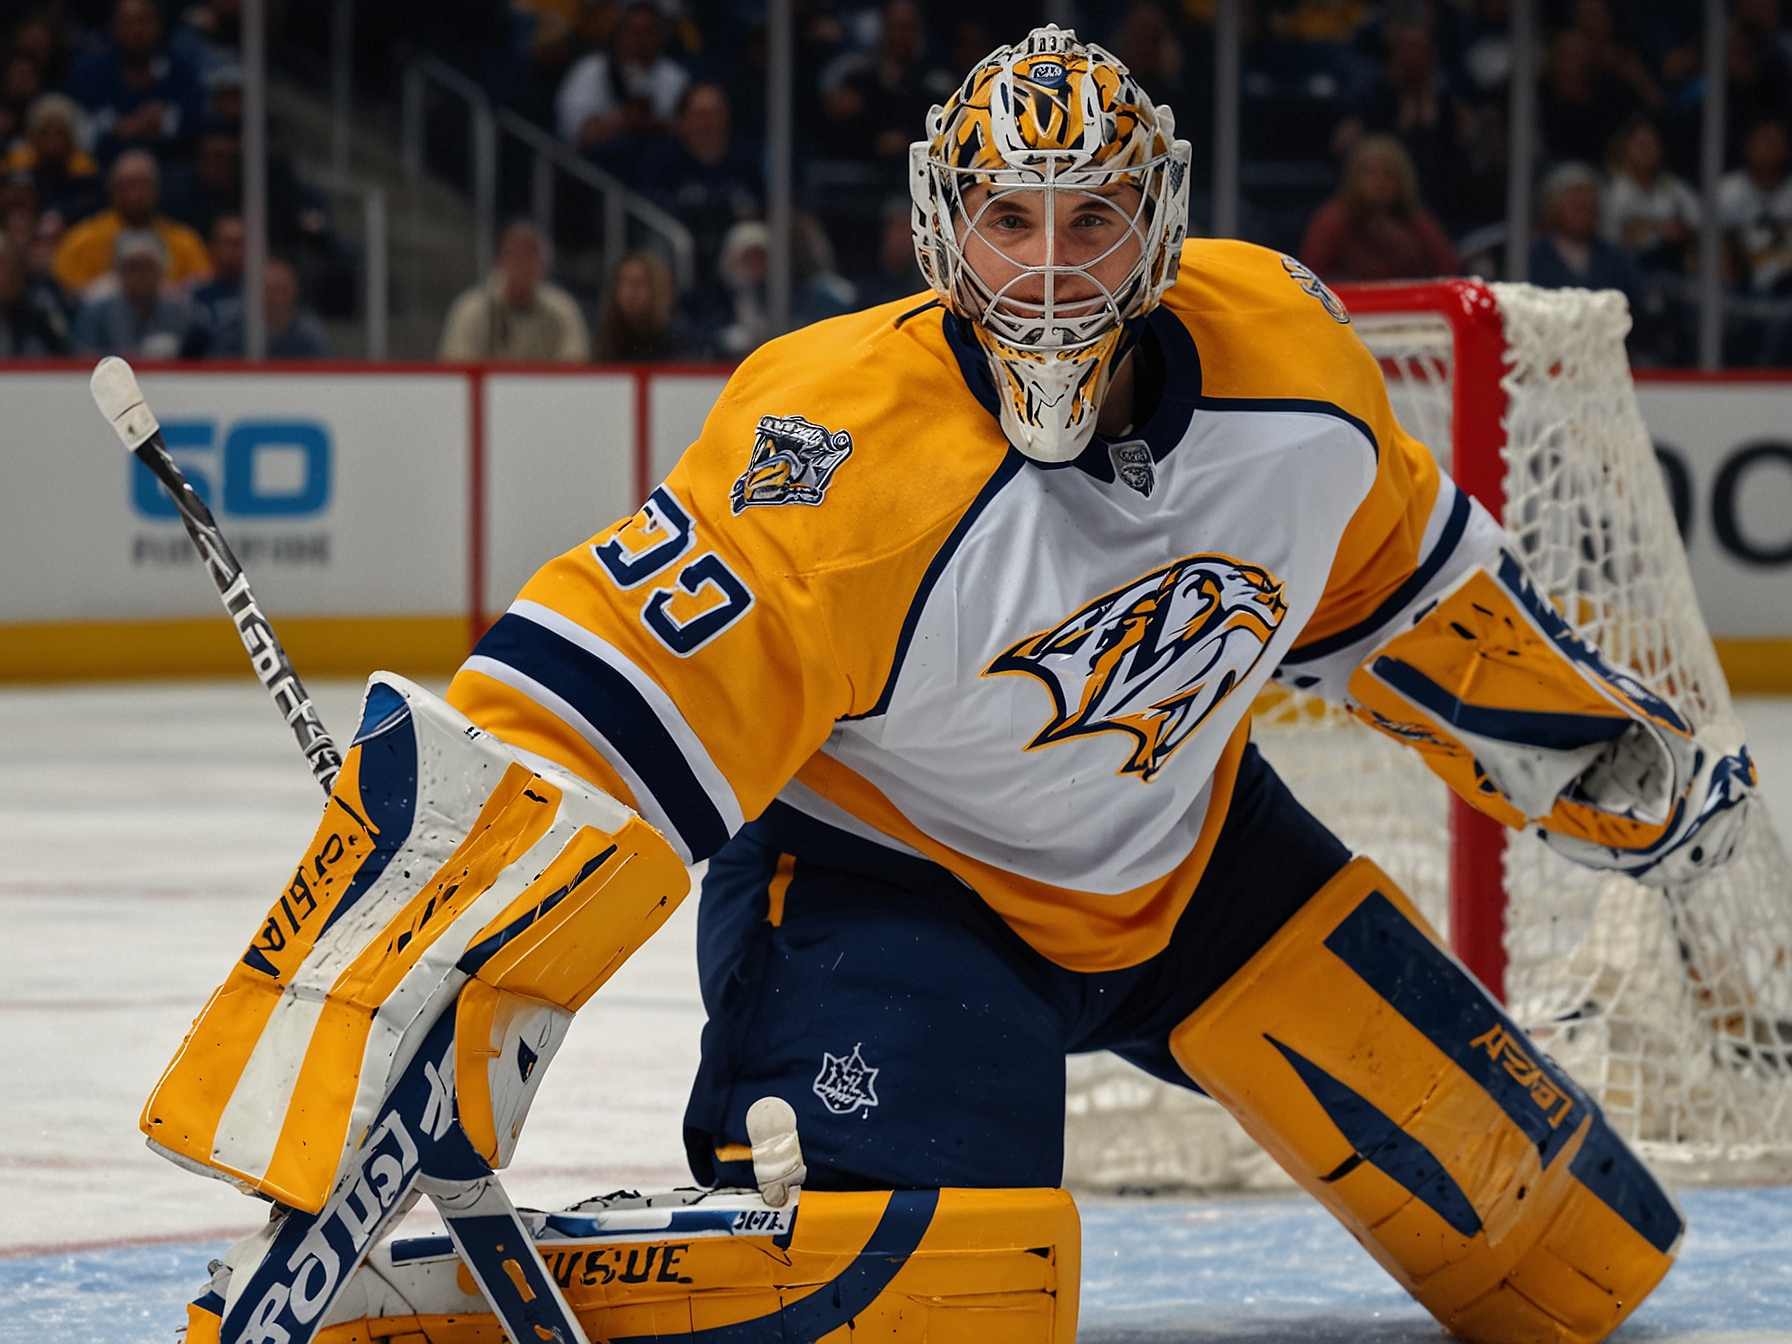 Nashville Predators' goaltender Juuse Saros in action on the ice, showcasing his skills after recently securing an extended contract with the team.